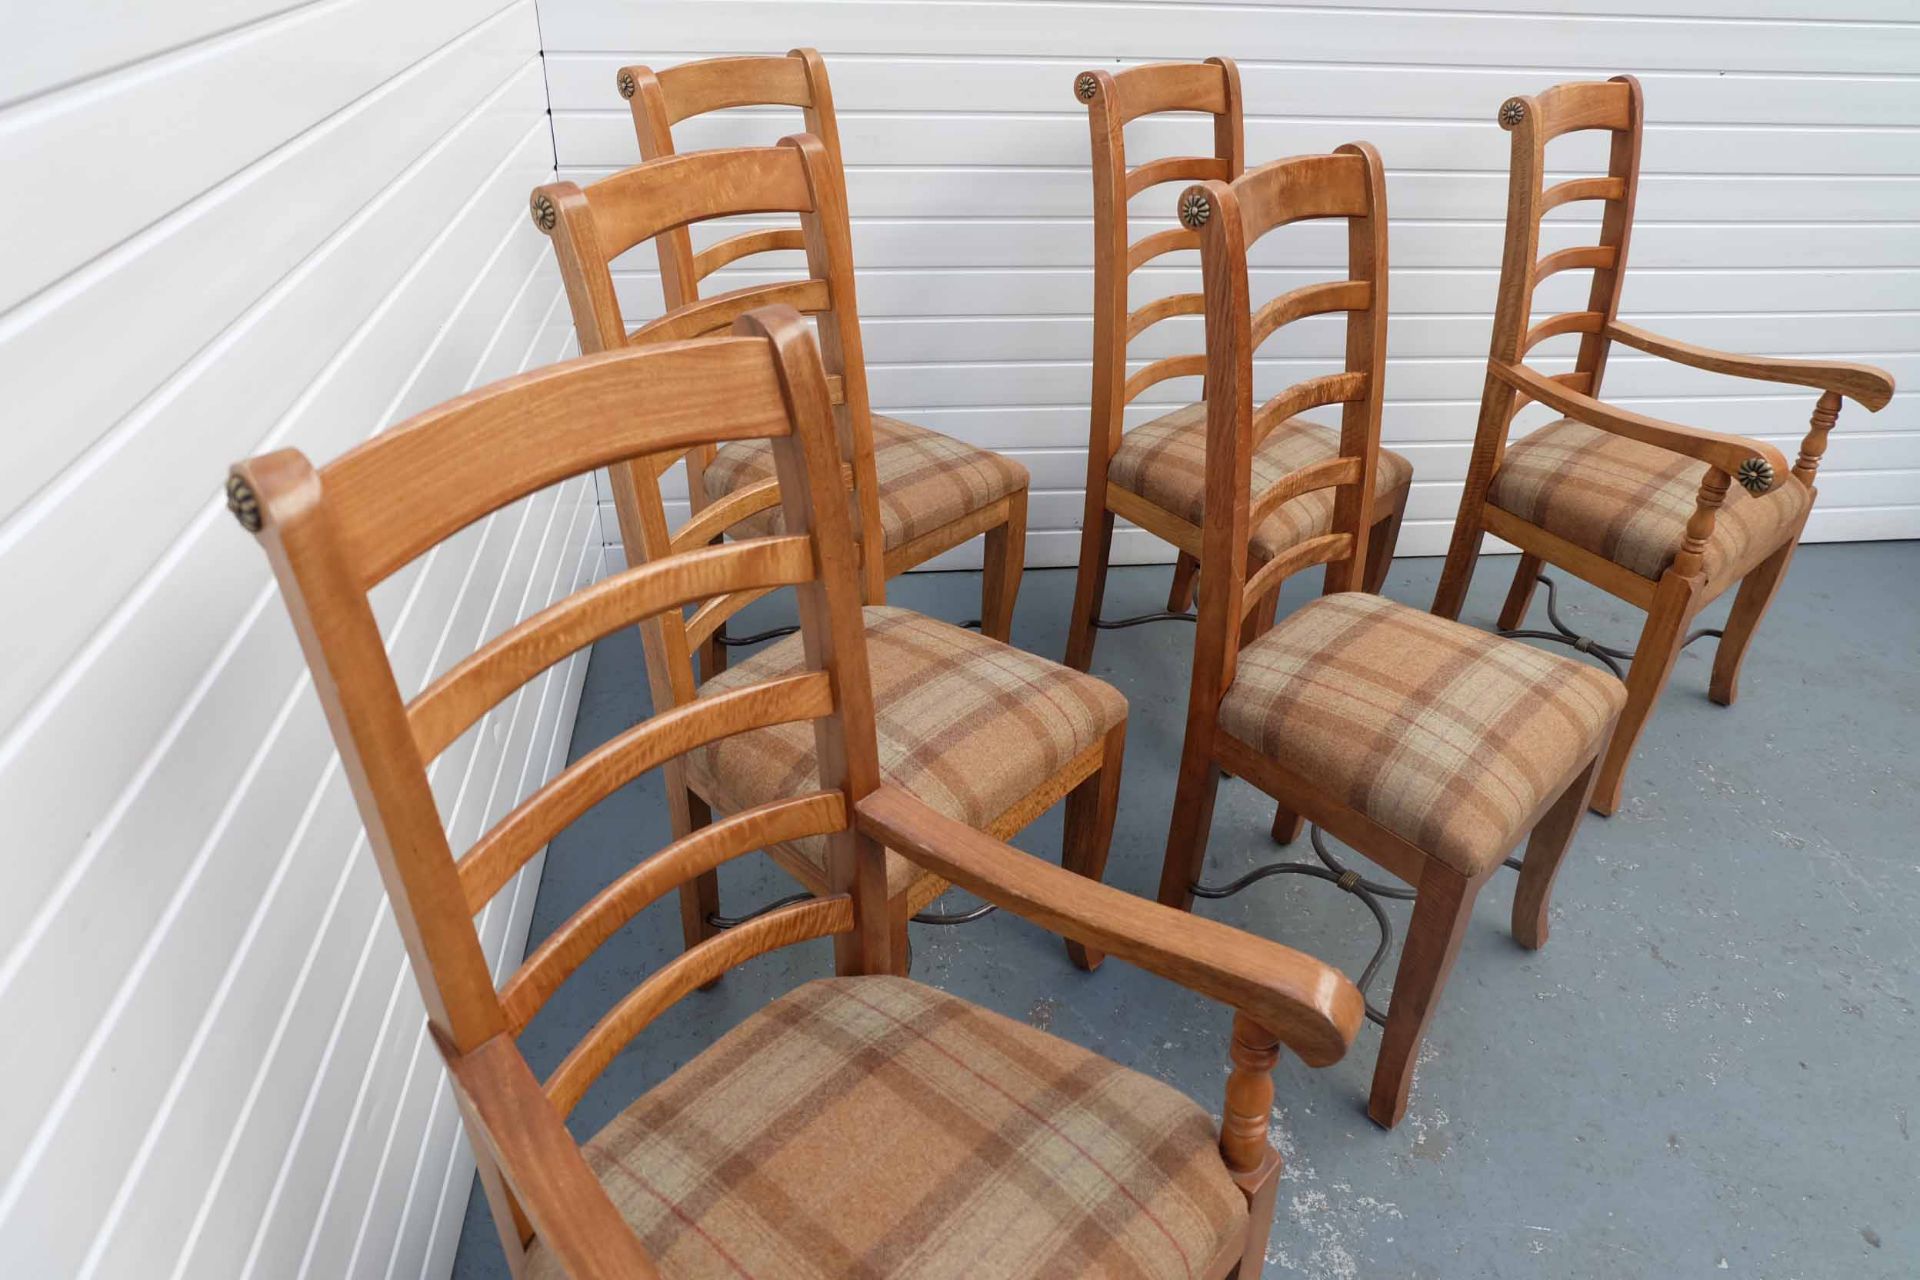 Set of 6 Mango Wood Dining Chairs With Upholstered Seats. Upholstered in Original Harris Tweed. - Image 6 of 7